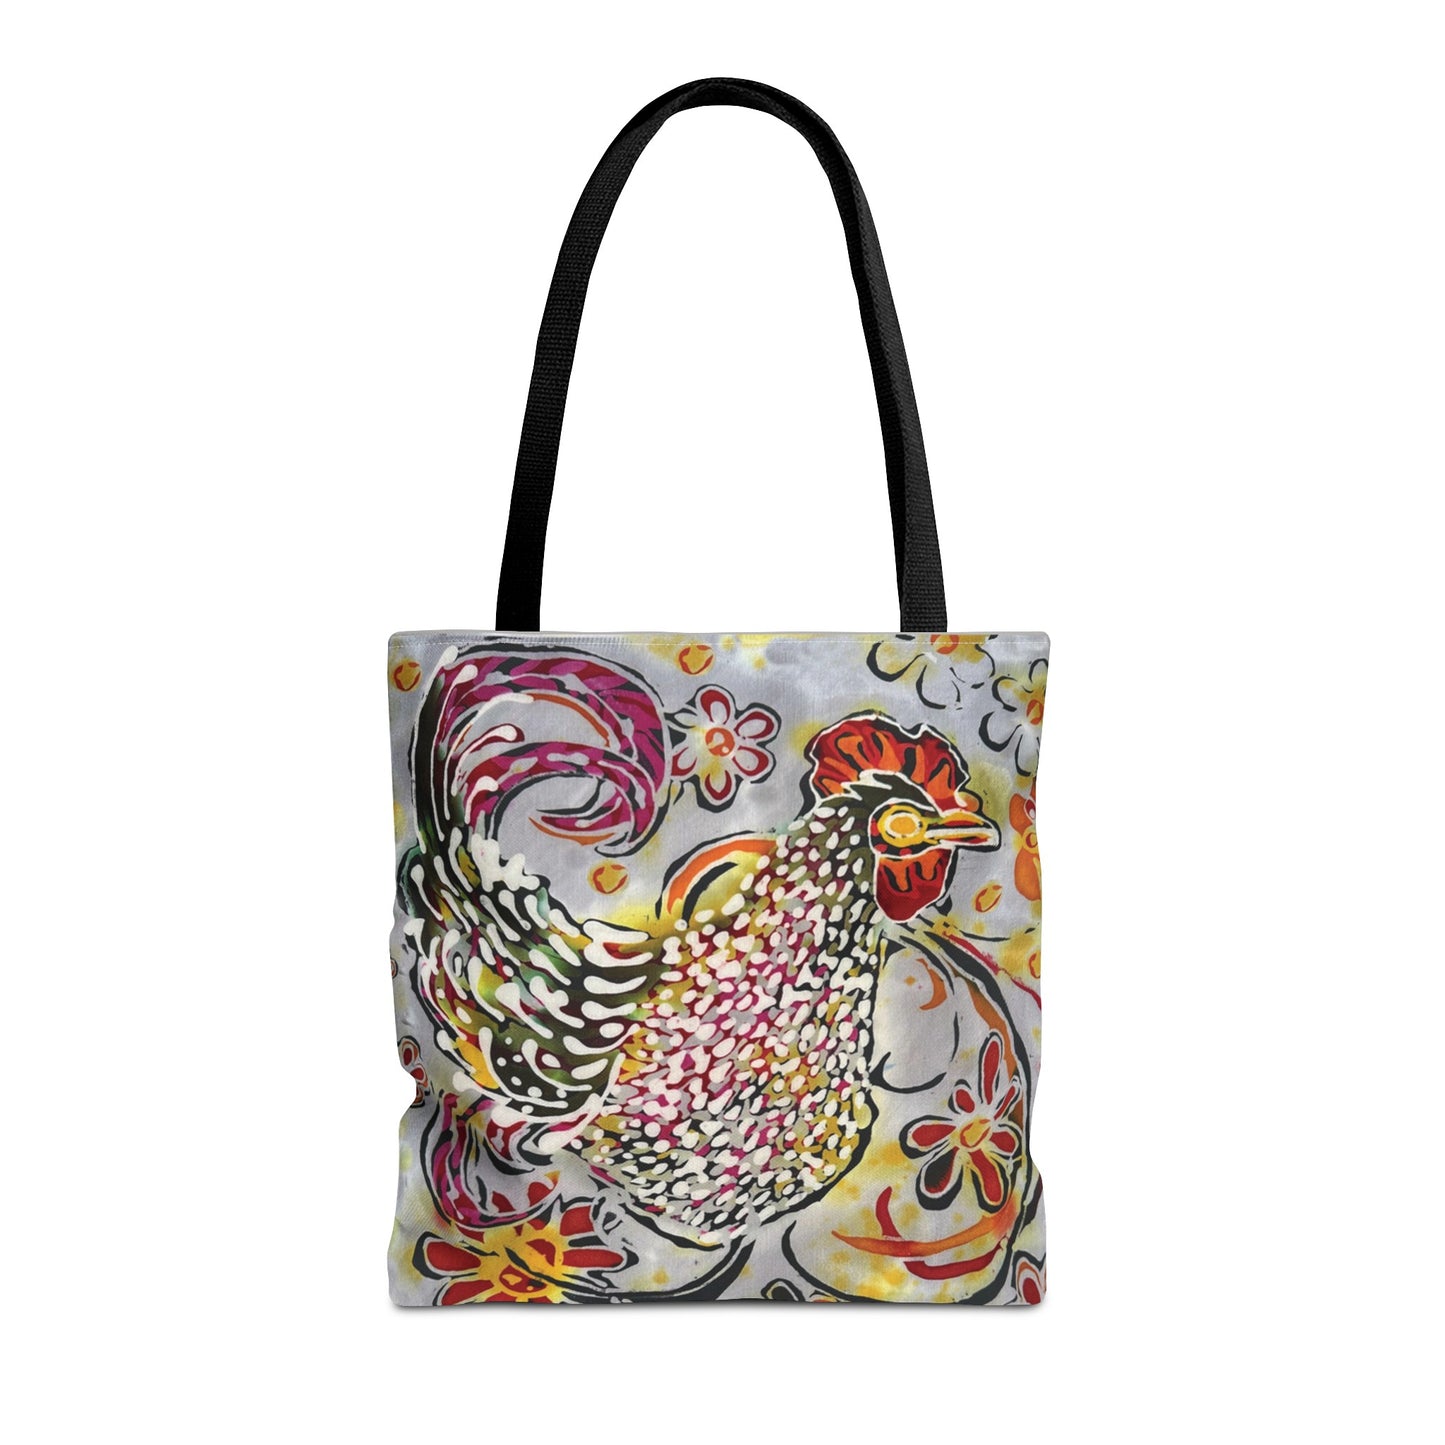 "Chicken with a Swirl" by Brigg Evans Design - Tote Bag (AOP)